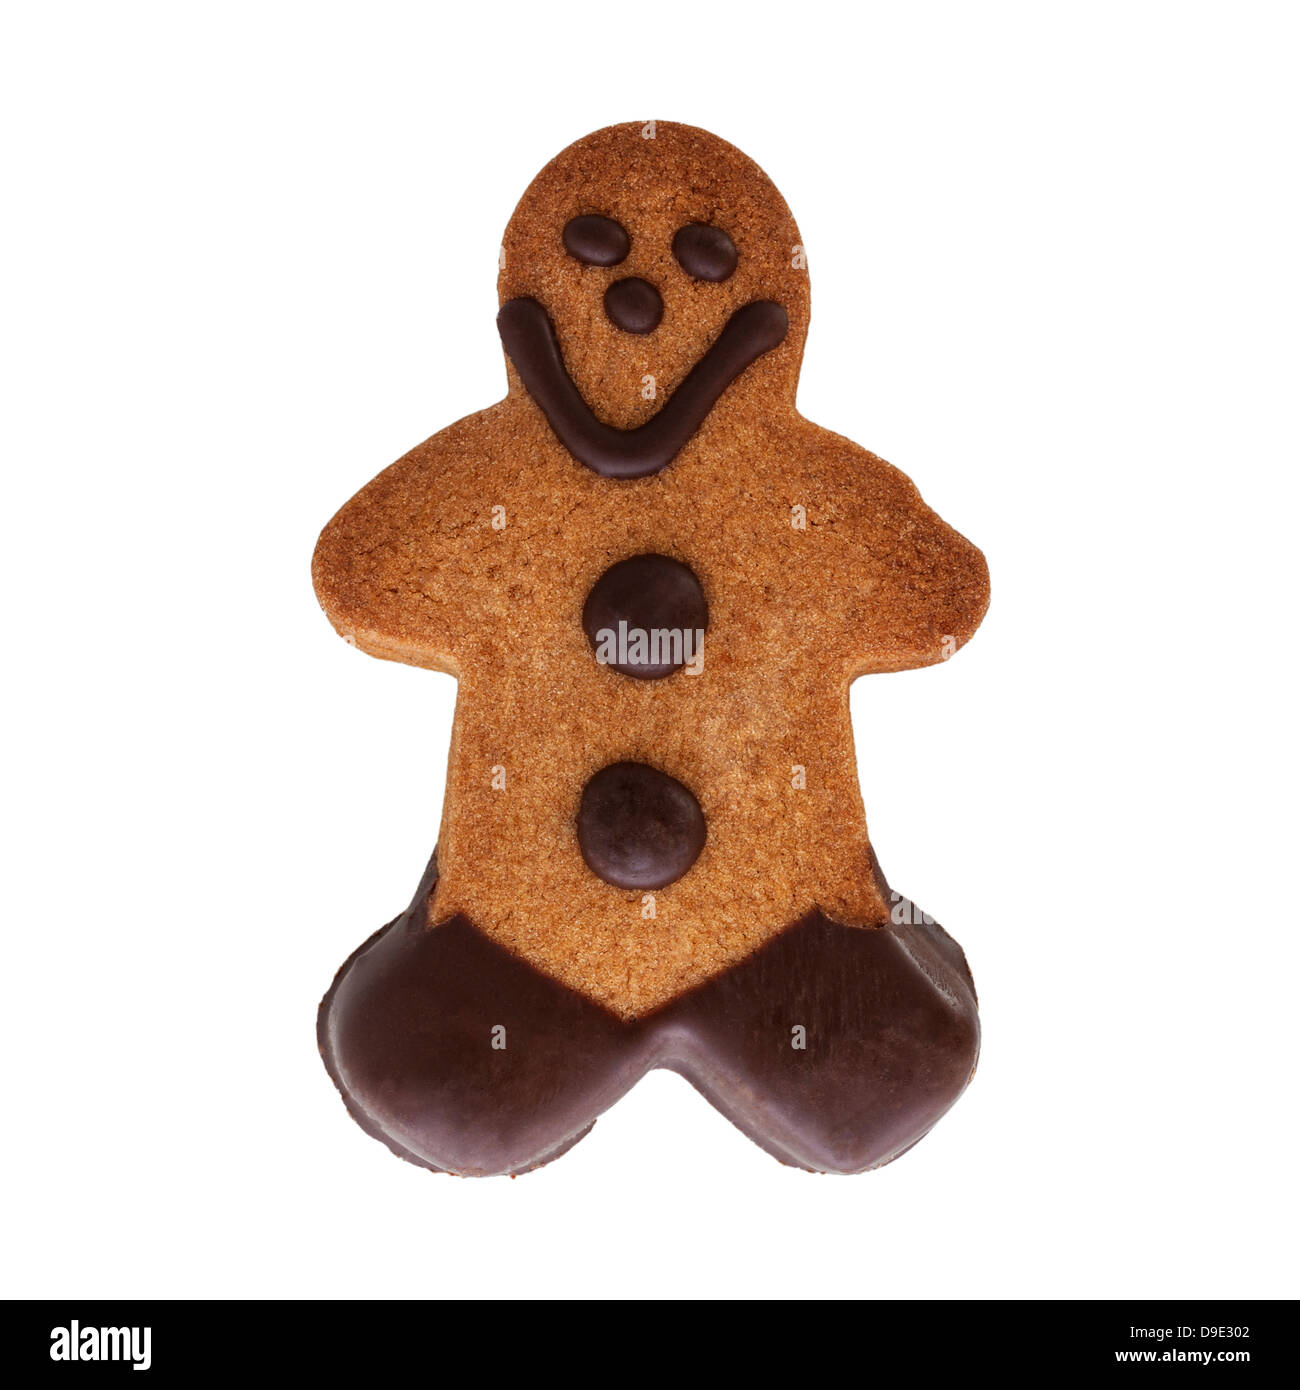 A home made Gingerbread man on a white background Stock Photo